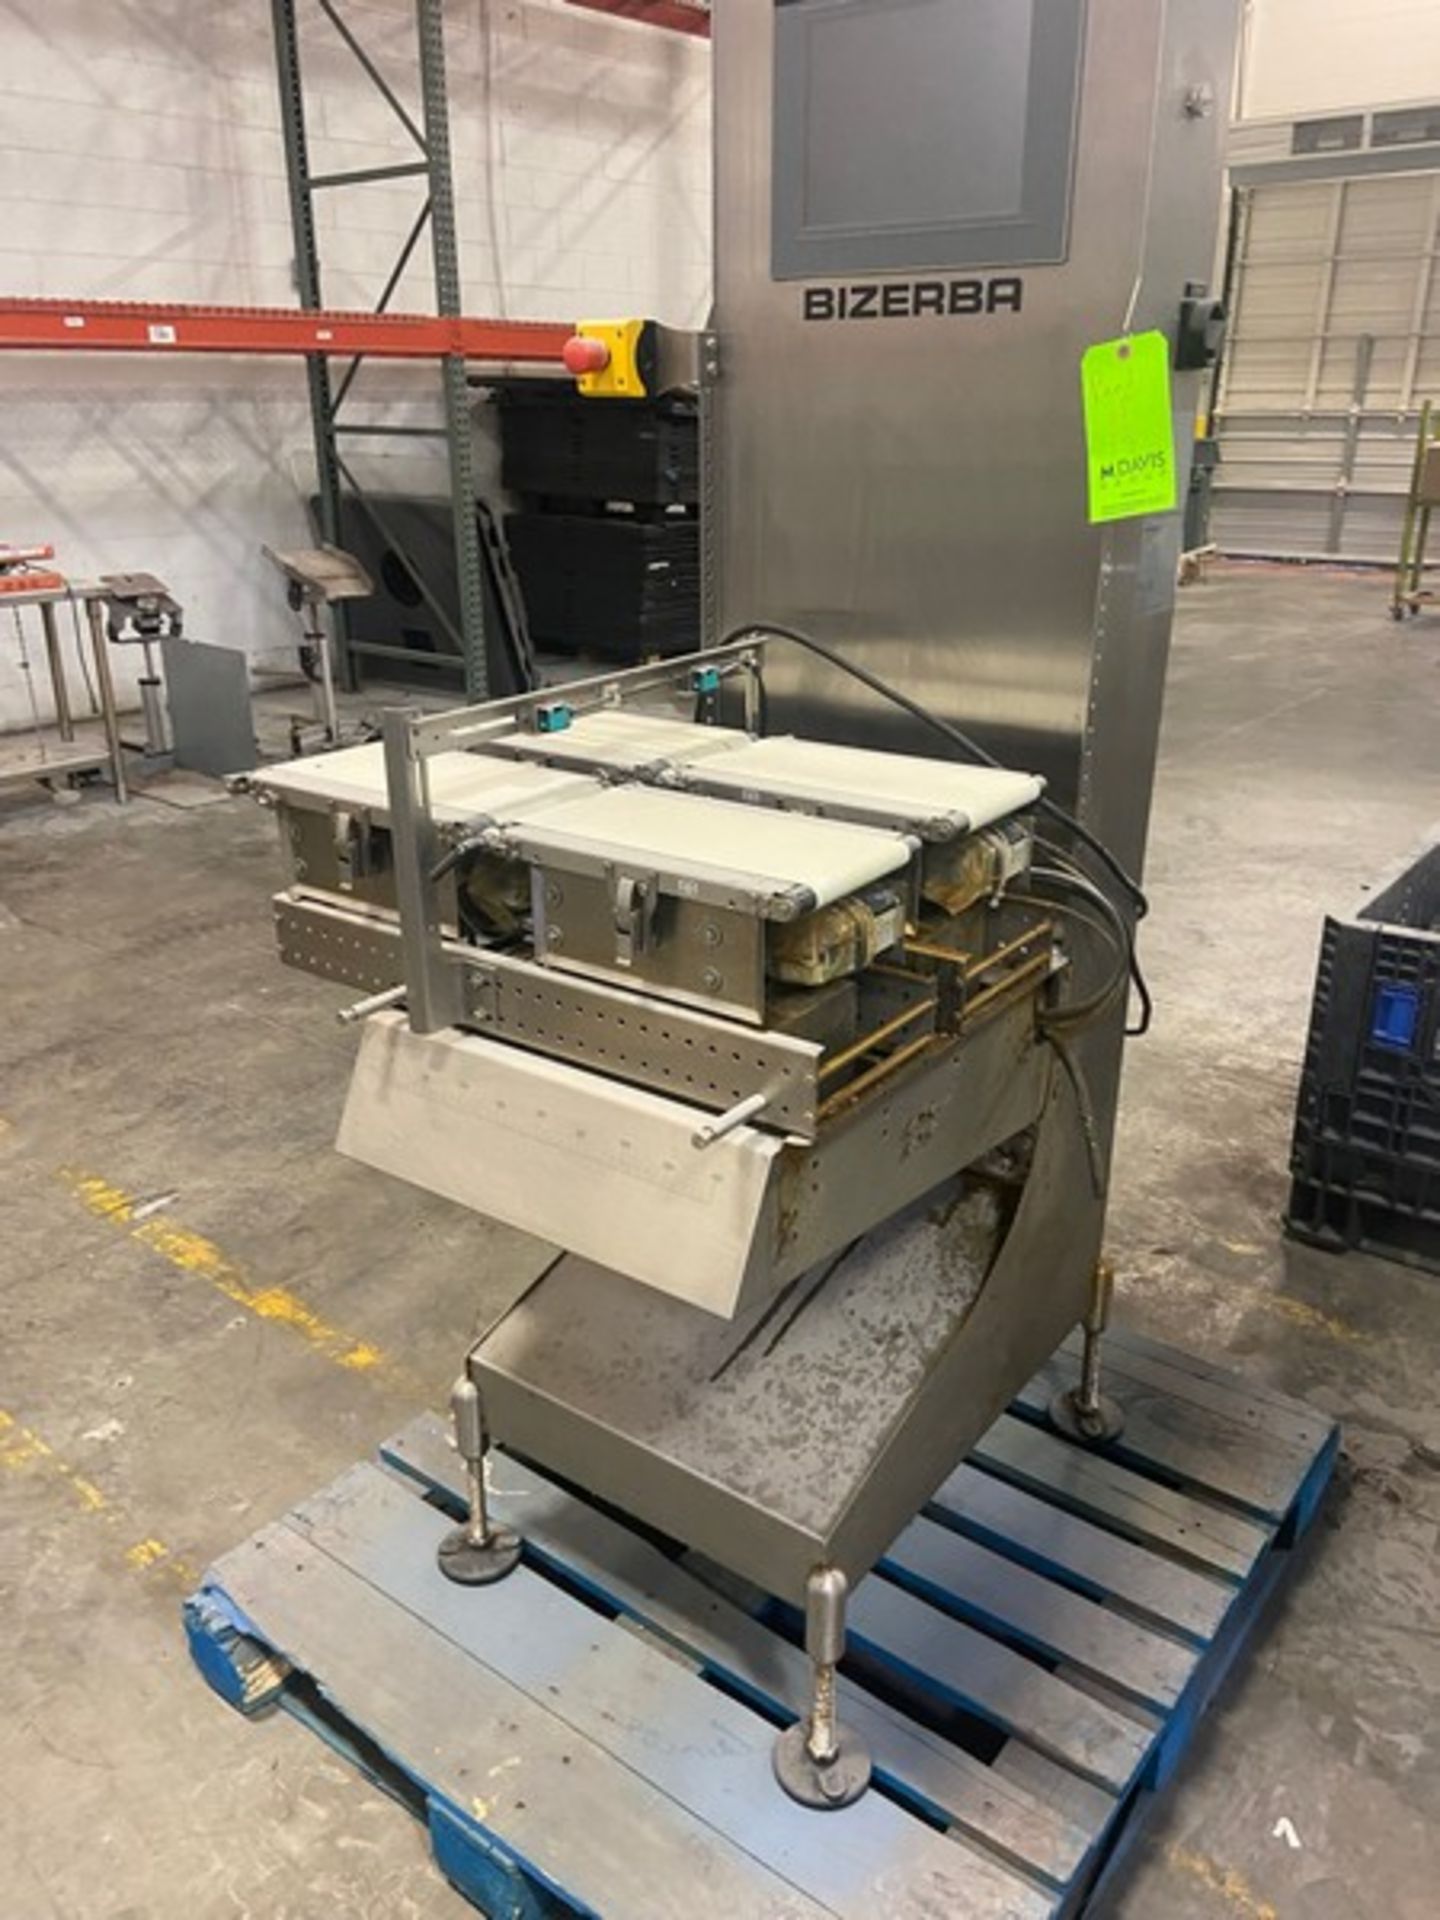 2017 SN Maschinenbau GmbH Pouch Filler, Type FBM22, S/N 1454, 480 Volts, 3 Phase, with Large - Image 93 of 111